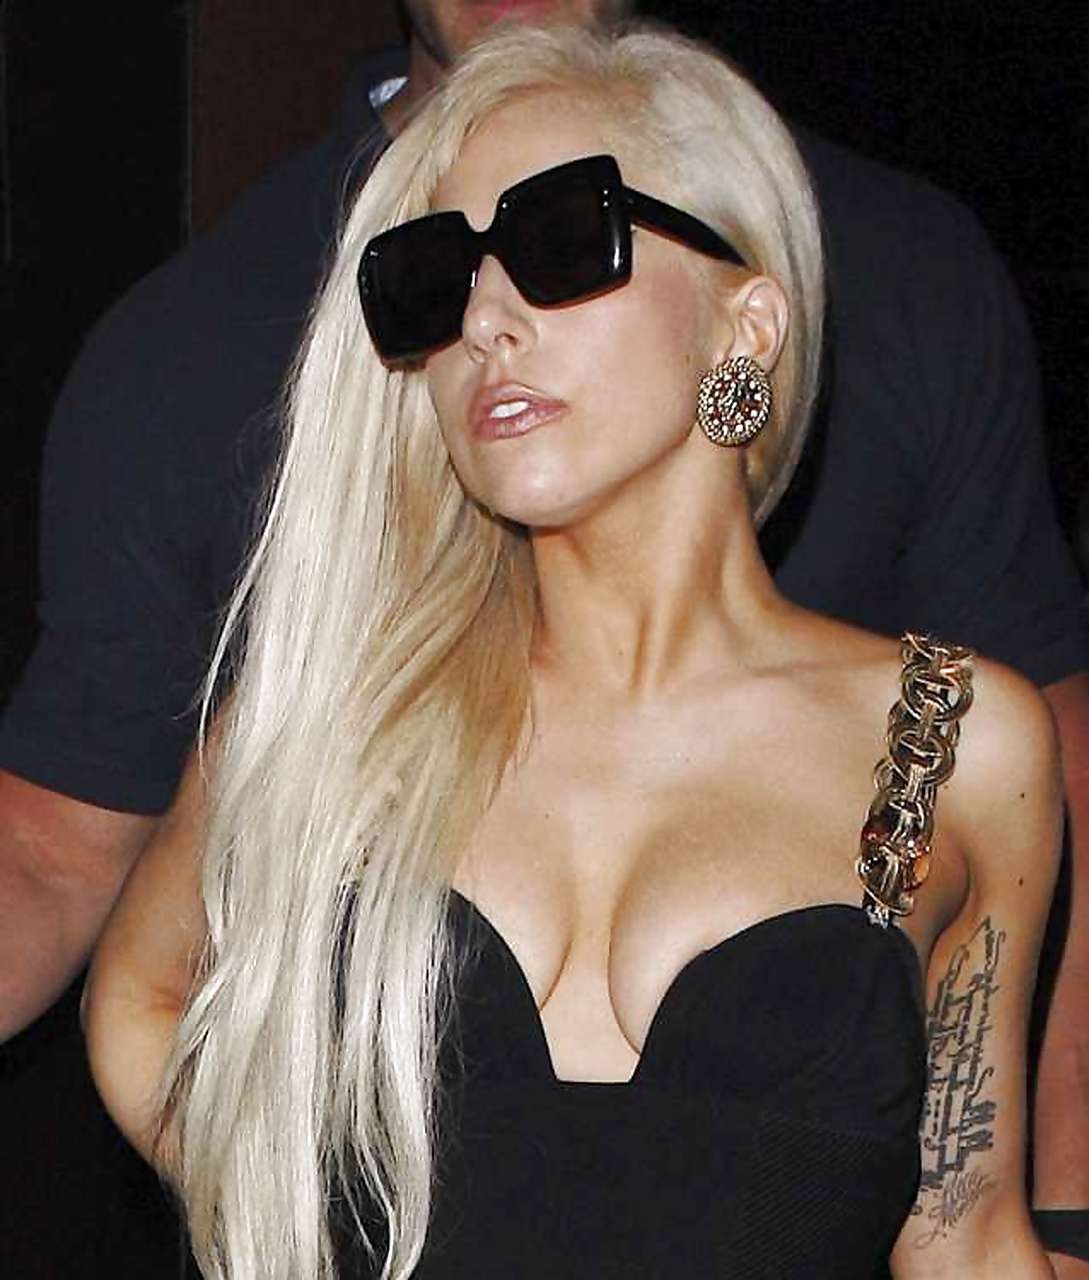 Lady Gaga showing her nice ass and nipple slip caught by paparazzi #75291849